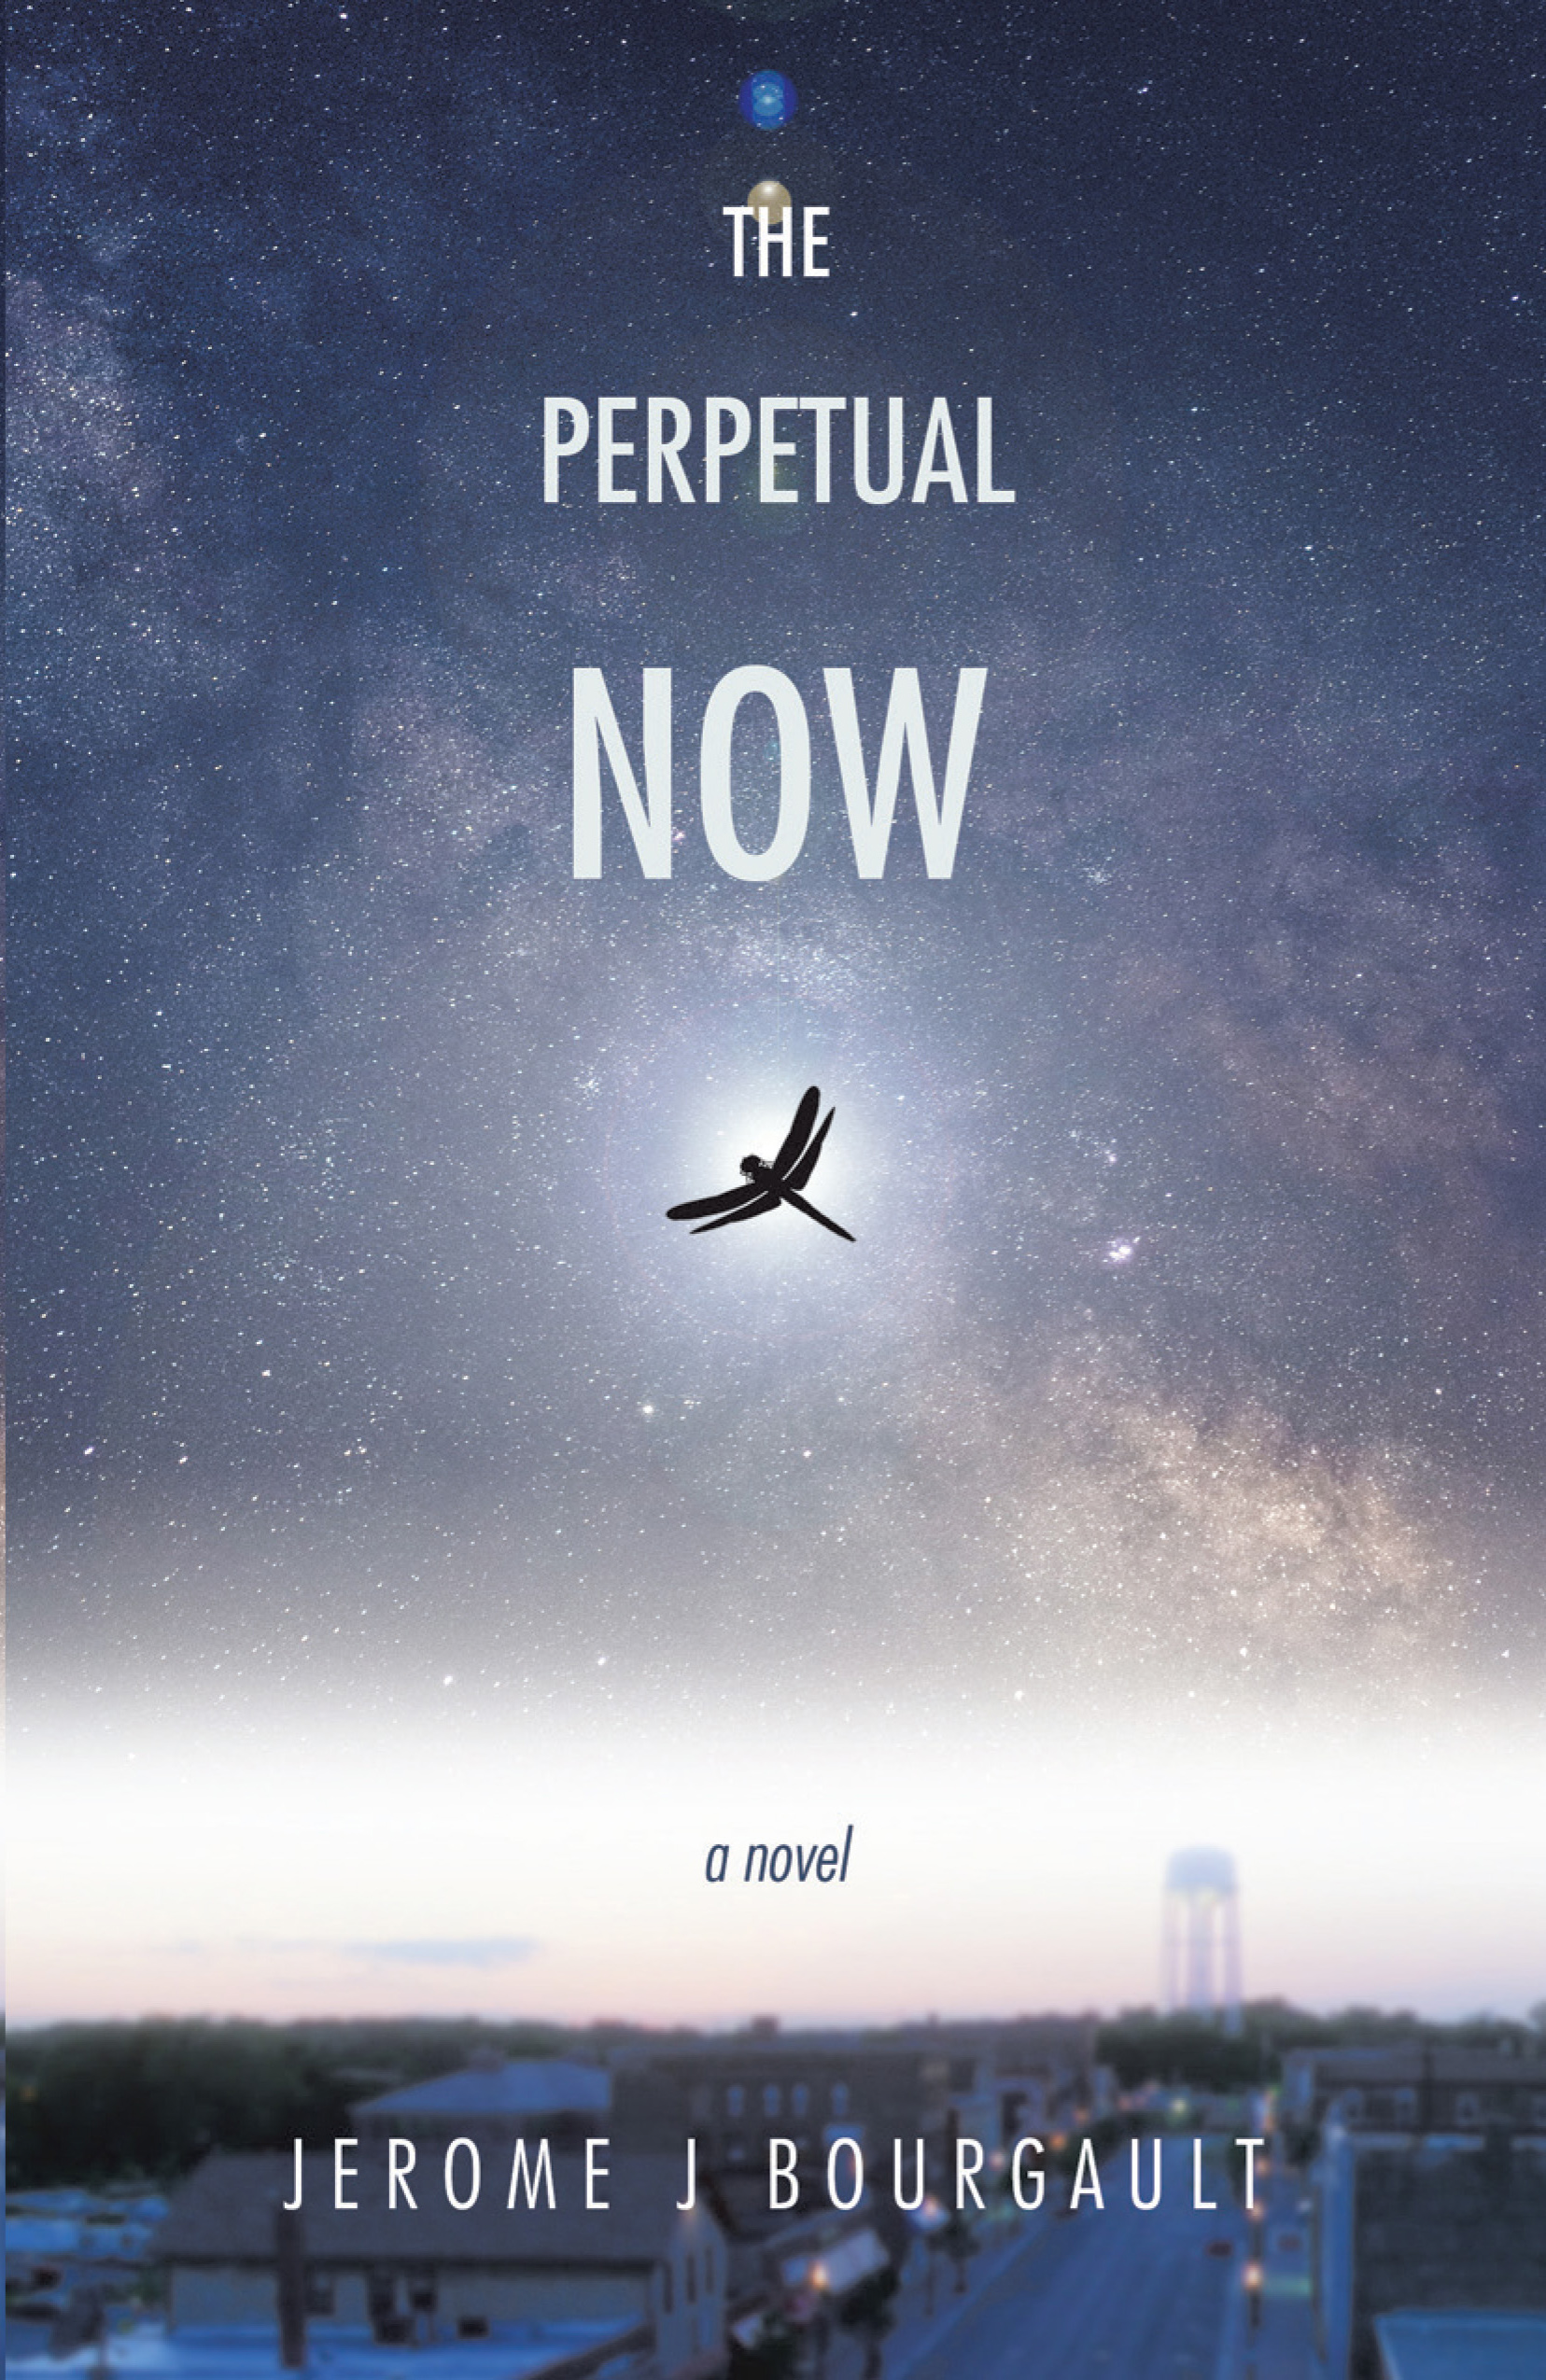 Front cover of The Perpetual Now by Jerome J. Bourgault